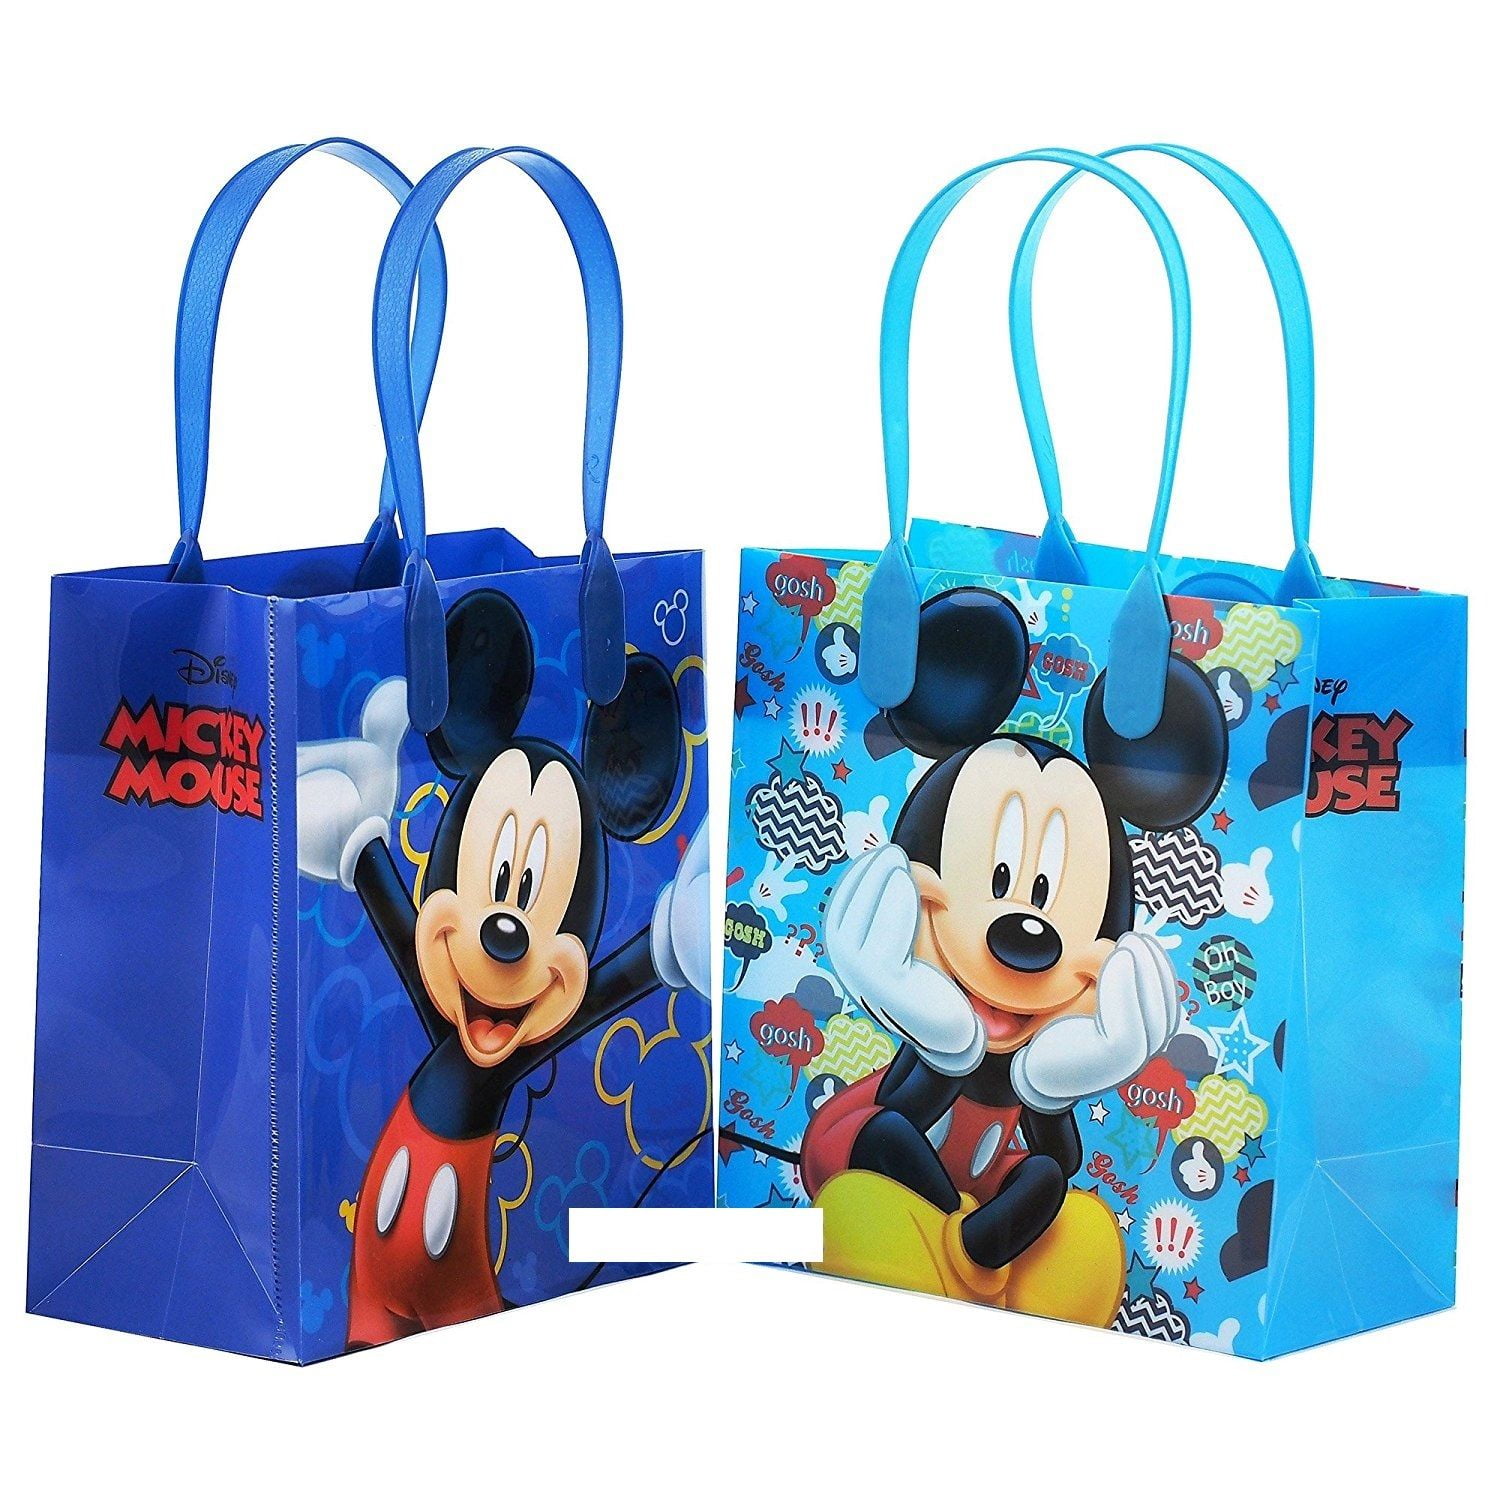 12 PCS Disney Mickey Mouse Candy Bags Party Favors Gift Goody Bags 